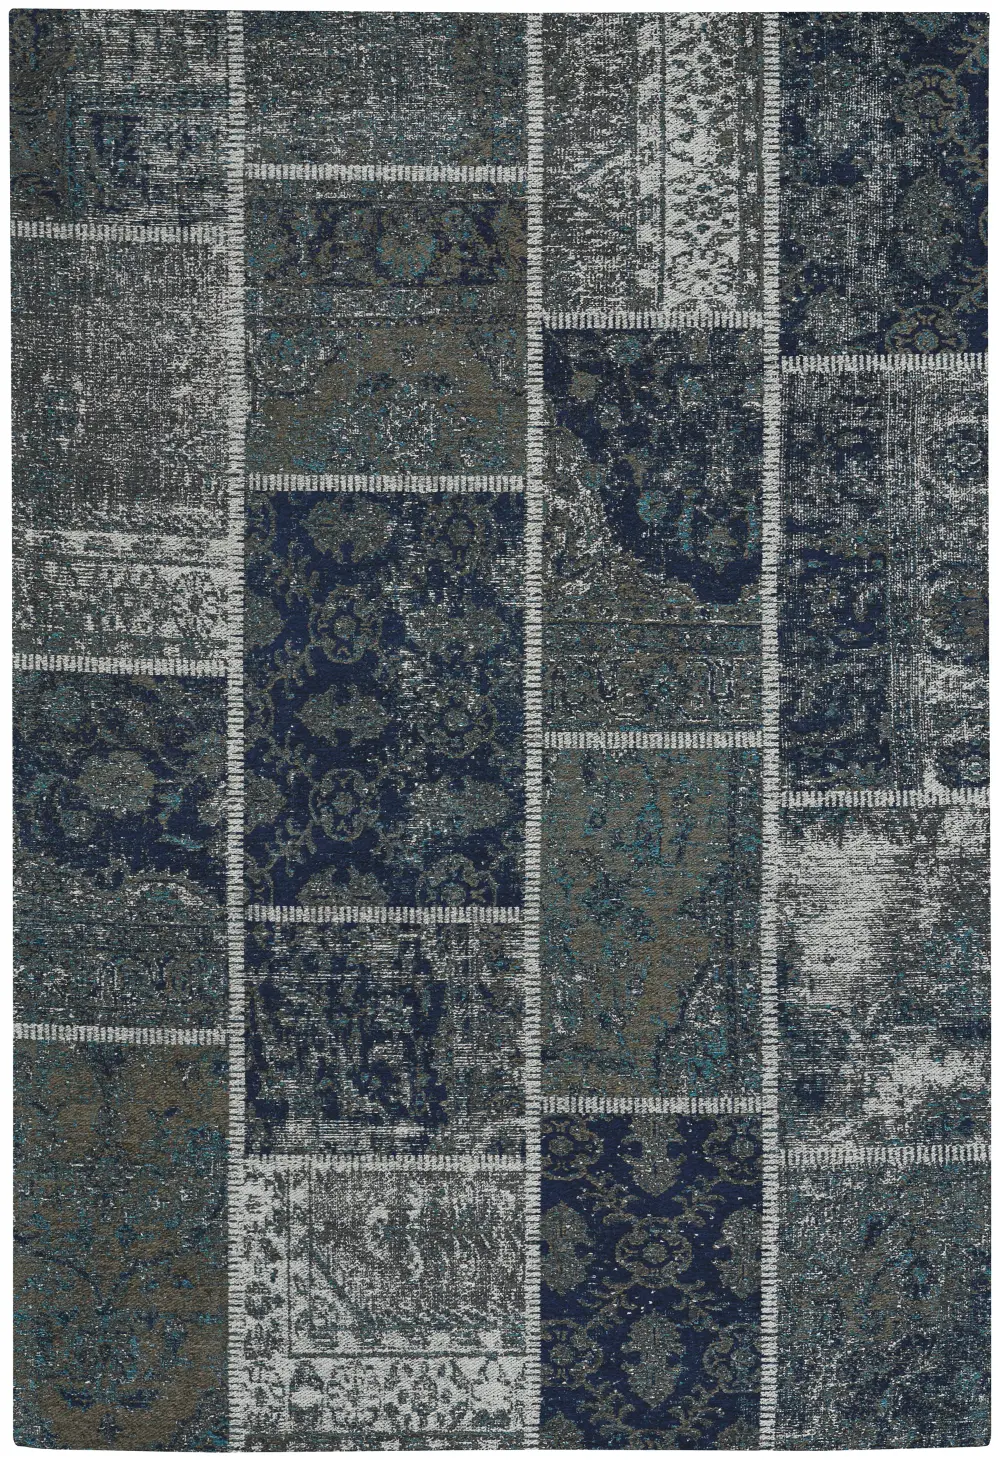 3246RS08001000400 8 x 10 Large Gray and Blue Rug - Cosmic-Patchwork-1